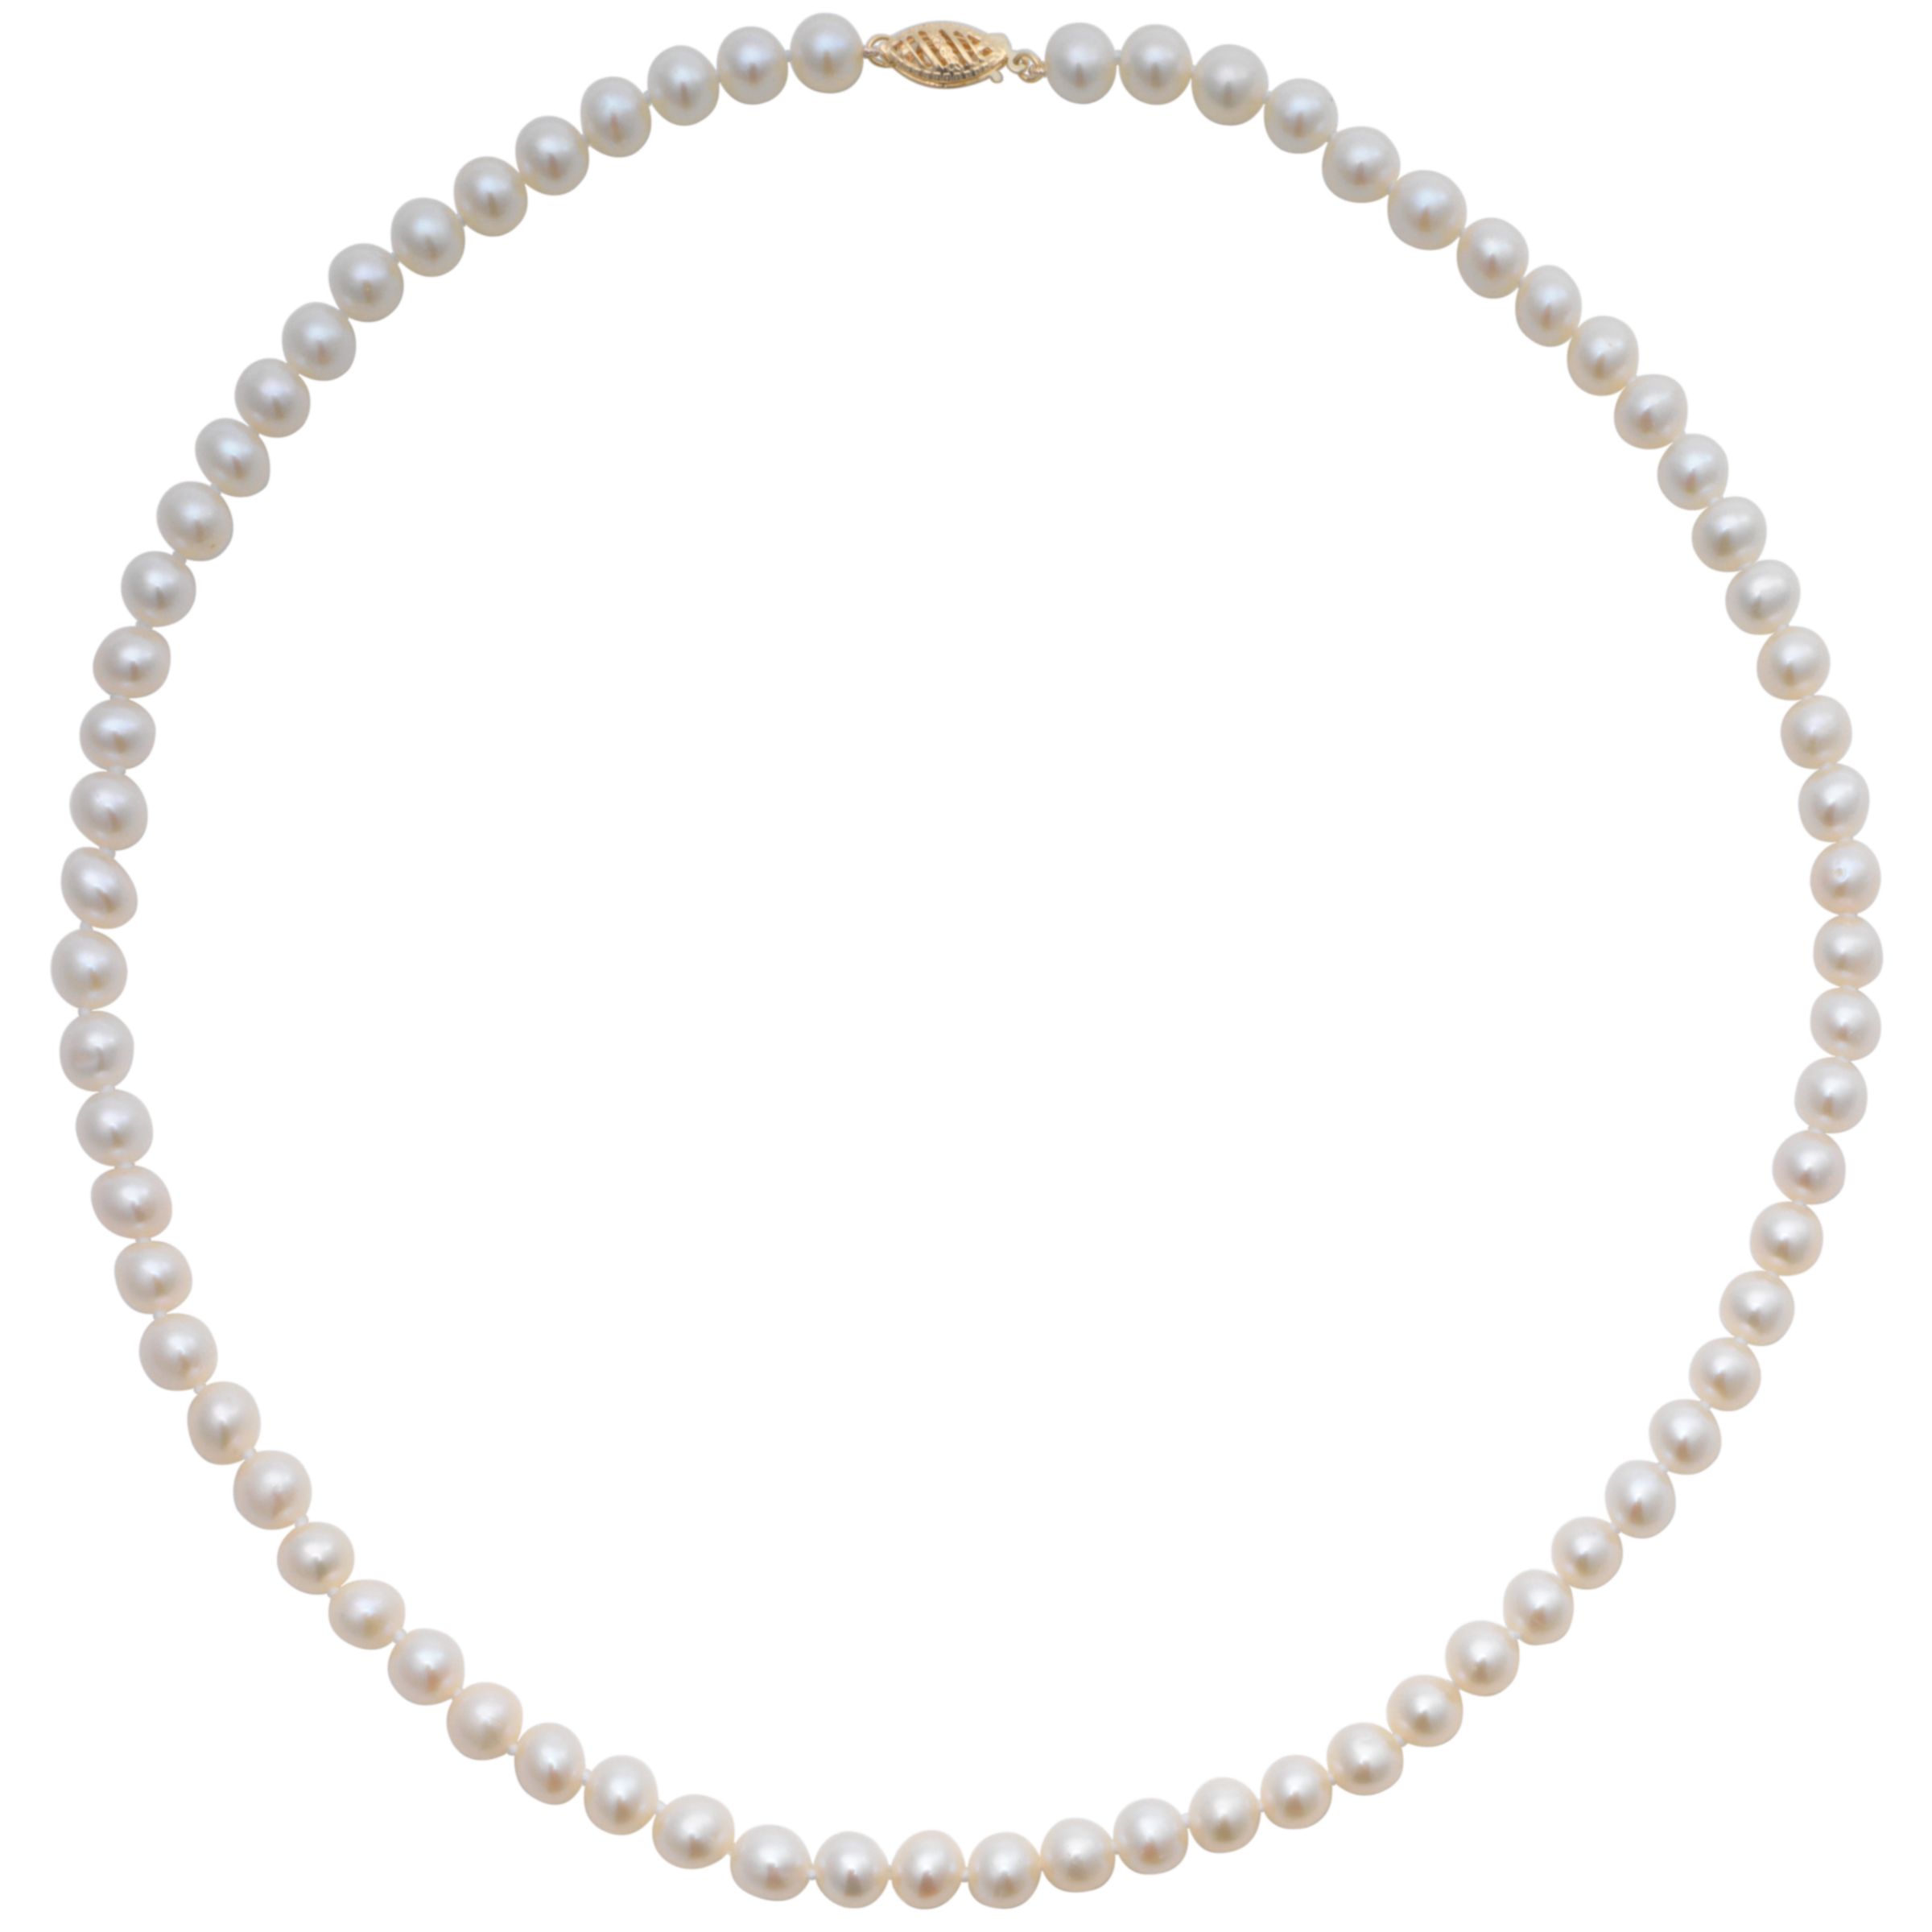 How to wear a pearl necklace without looking old - Quora